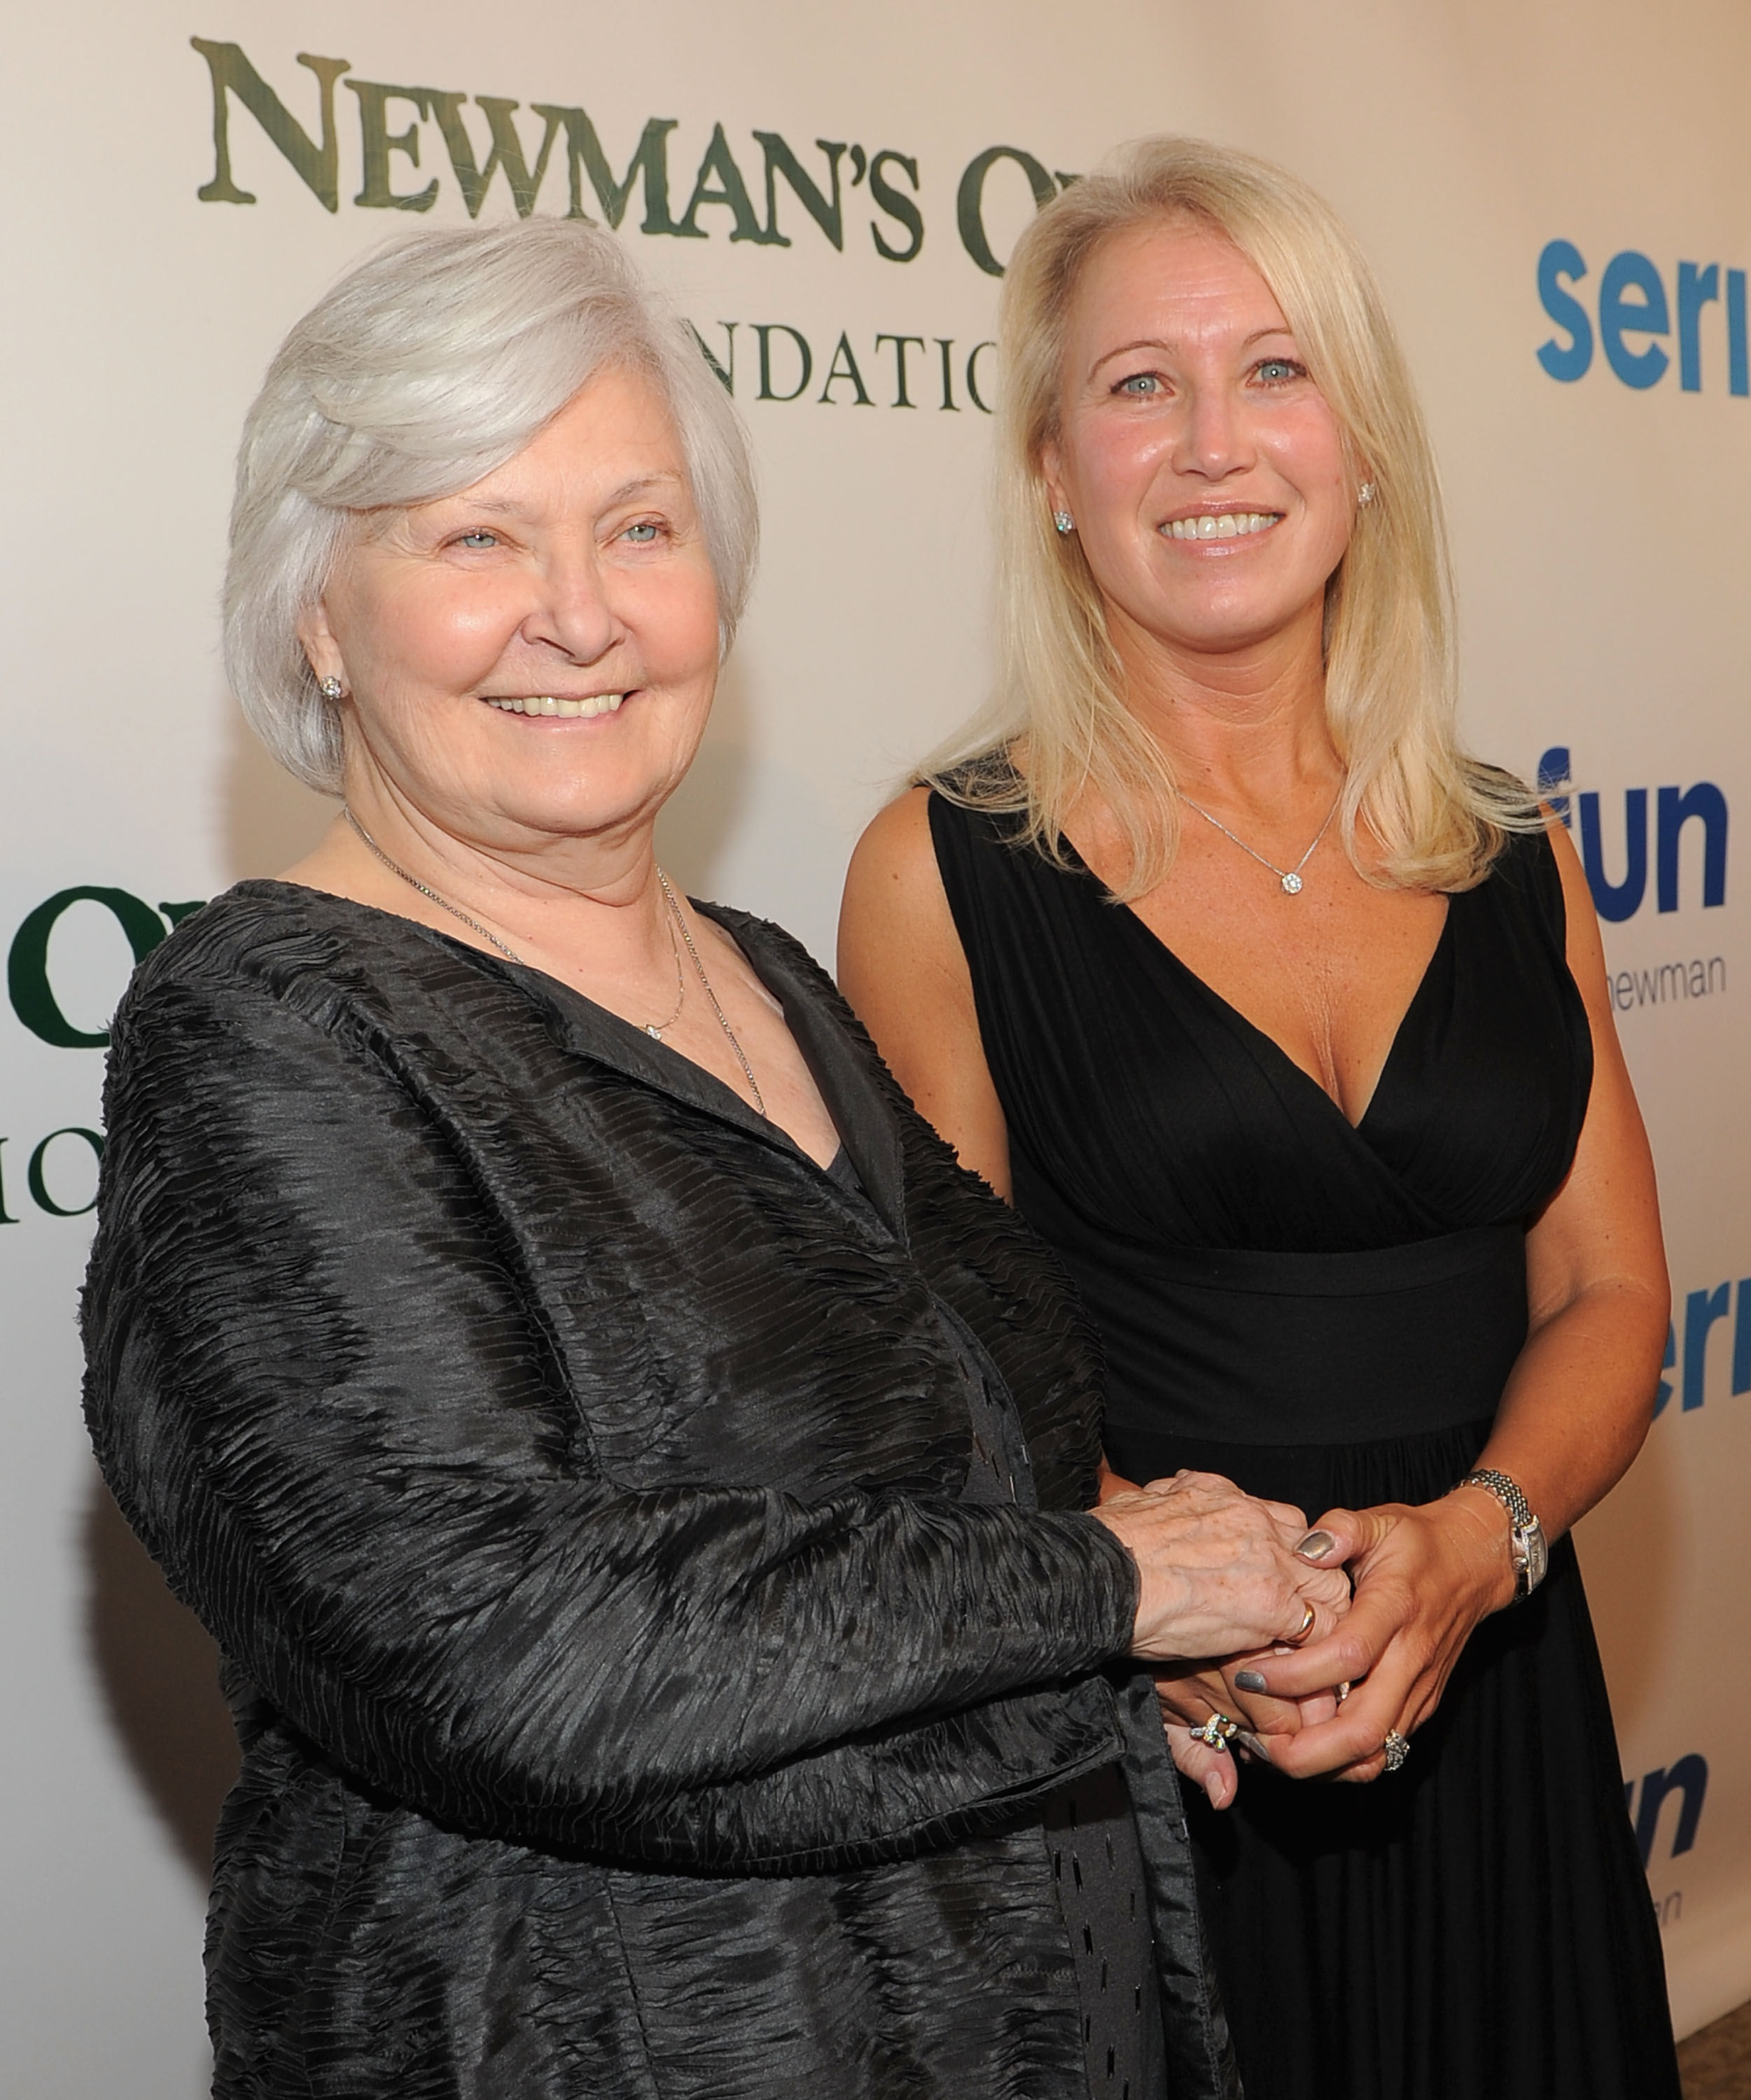 Joanne Woodward and Claire Newman attend a Celebration of Paul Newman's Dream to Benefit the SeriousFun Children's Network at Avery Fisher Hall, Lincoln Center on April 2, 2012, in New York City. | Source: Getty Images